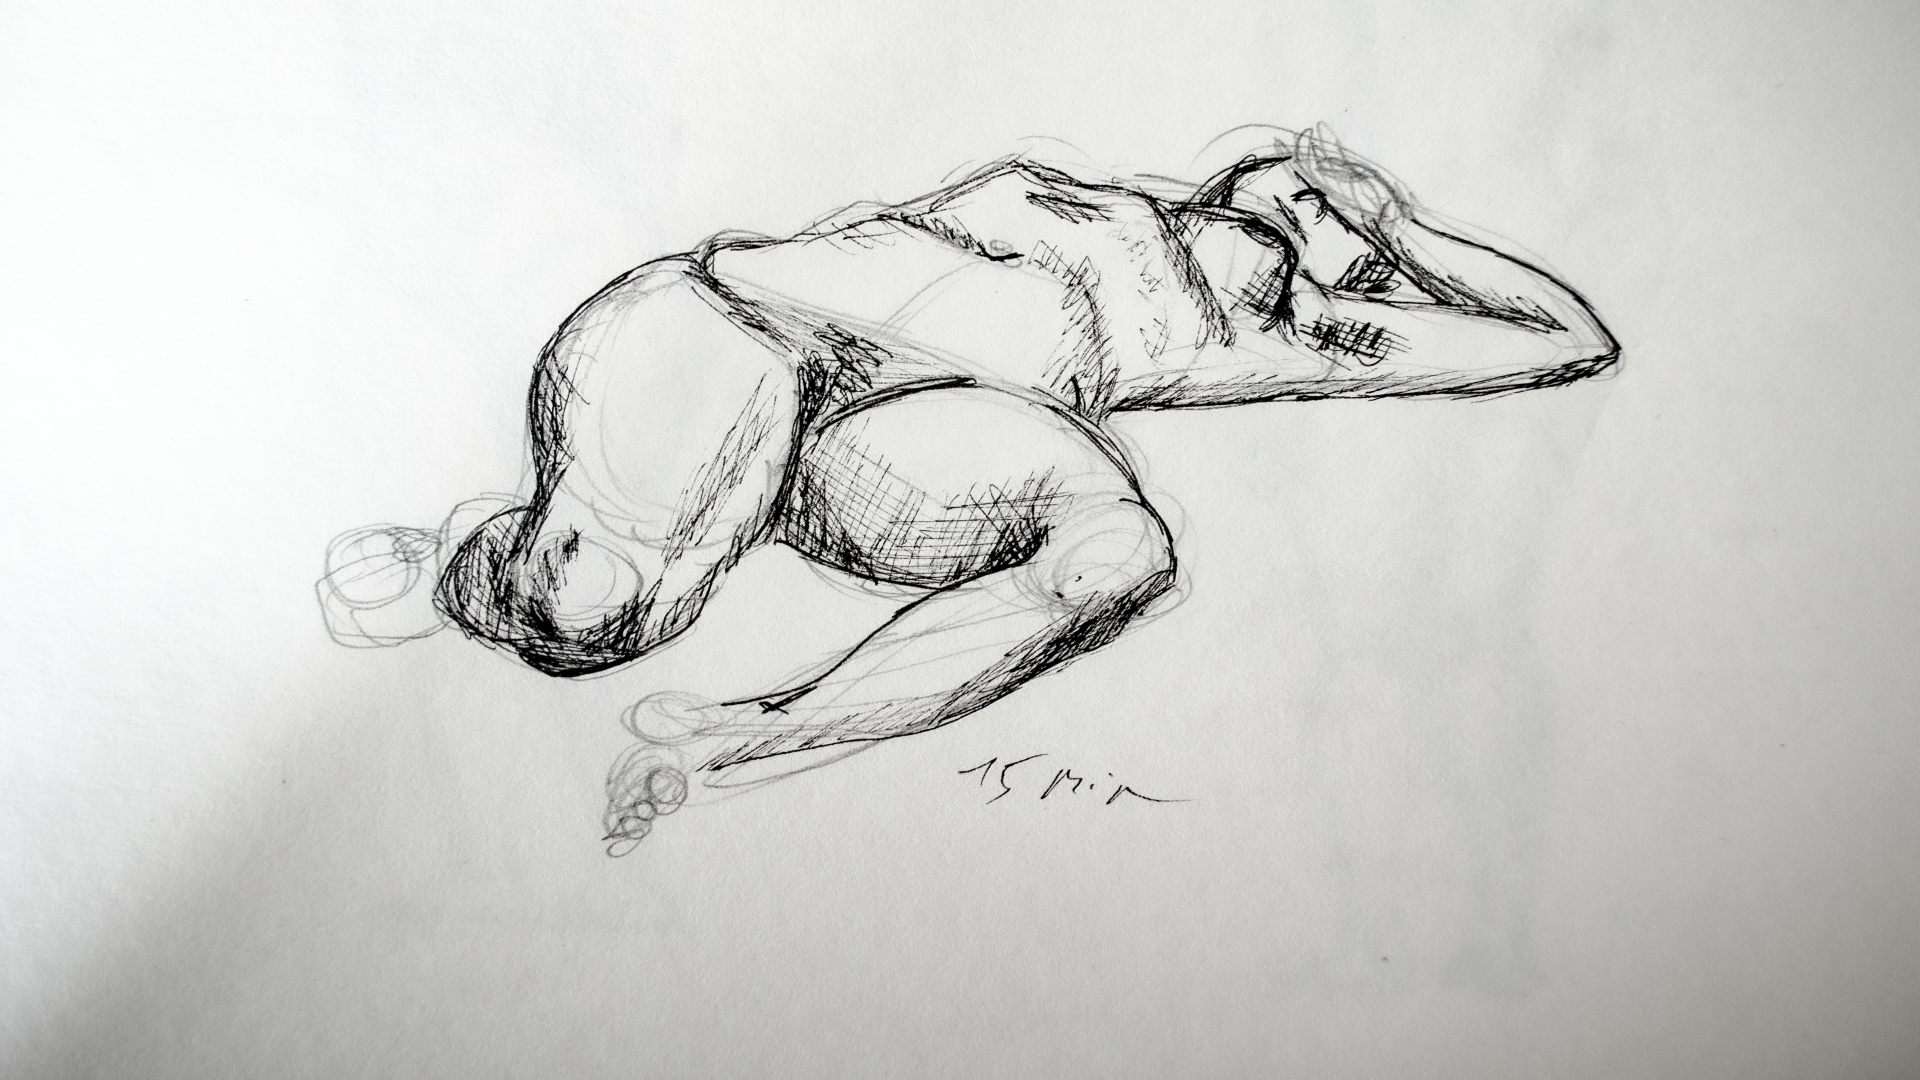 Sketch of nude woman